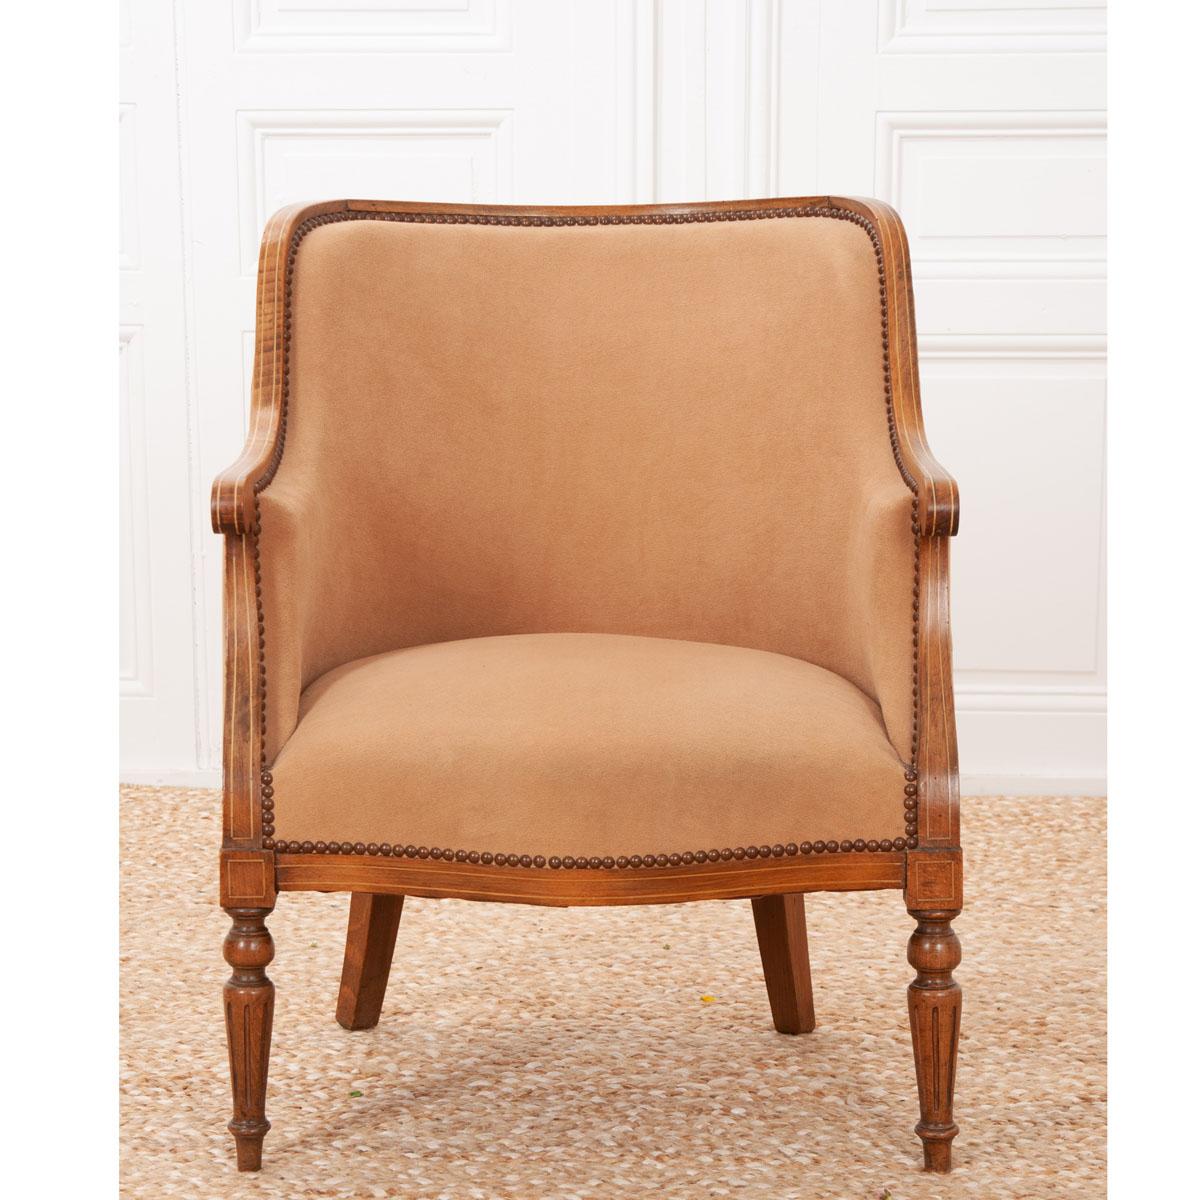 A single, inlaid walnut and upholstered Louis XVI-style armchair. The frame has a rich tone with a thin inlay throughout, wrapping around the back and down both arms. This chair is upholstered in a camel colored fabric that is trimmed in nail heads.